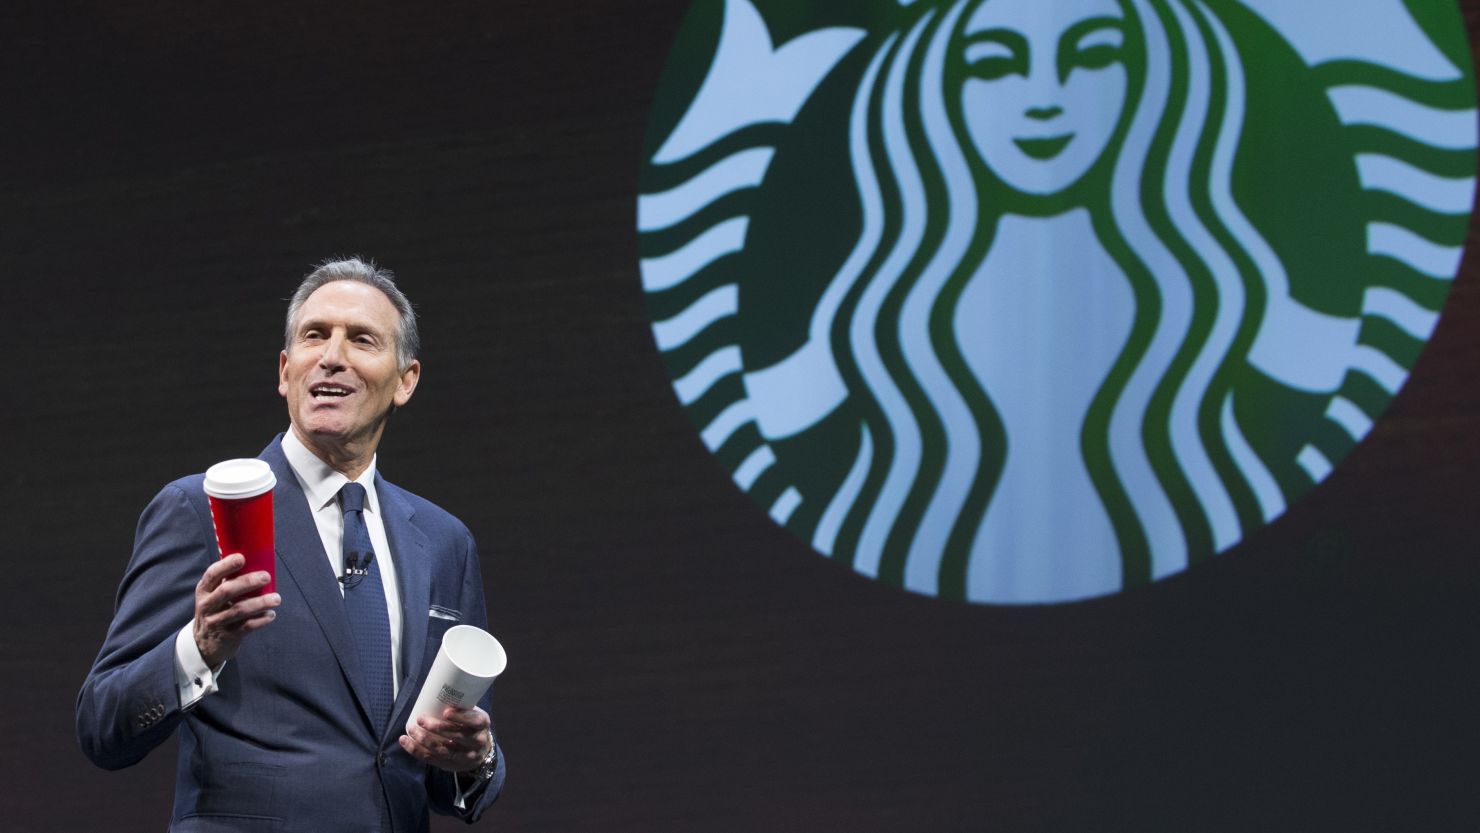 Starbucks CEO Howard Schultz speaks during the Starbucks Annual Shareholders Meeting on March 23, 2016 in Seattle, Washington. (Photo by Stephen Brashear/Getty Images)